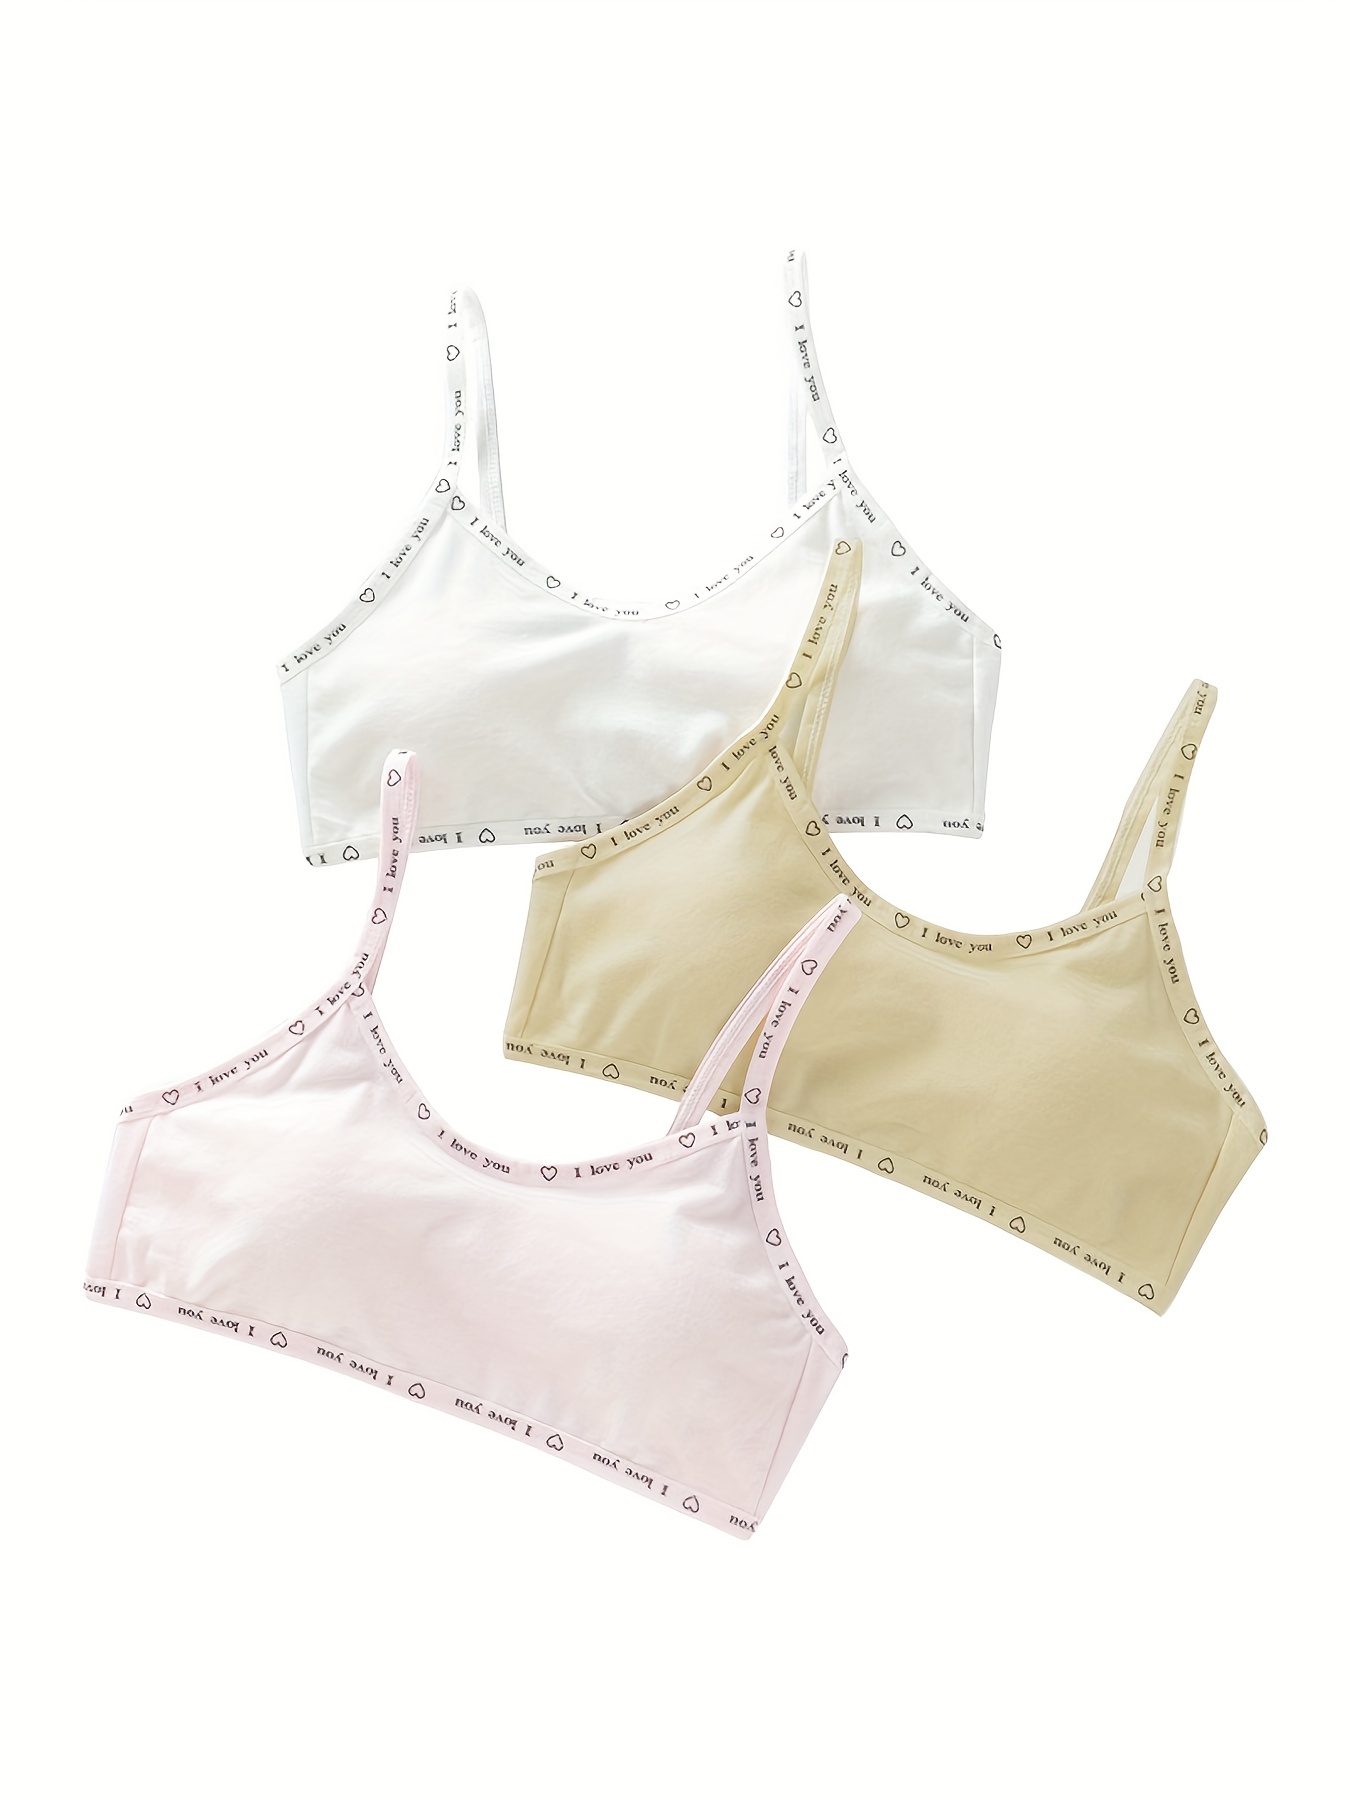 Comfortable Girls Training Bras 8-12 Years, No Underwire, Seamless, Small A  Cup, 2 Gift Packs